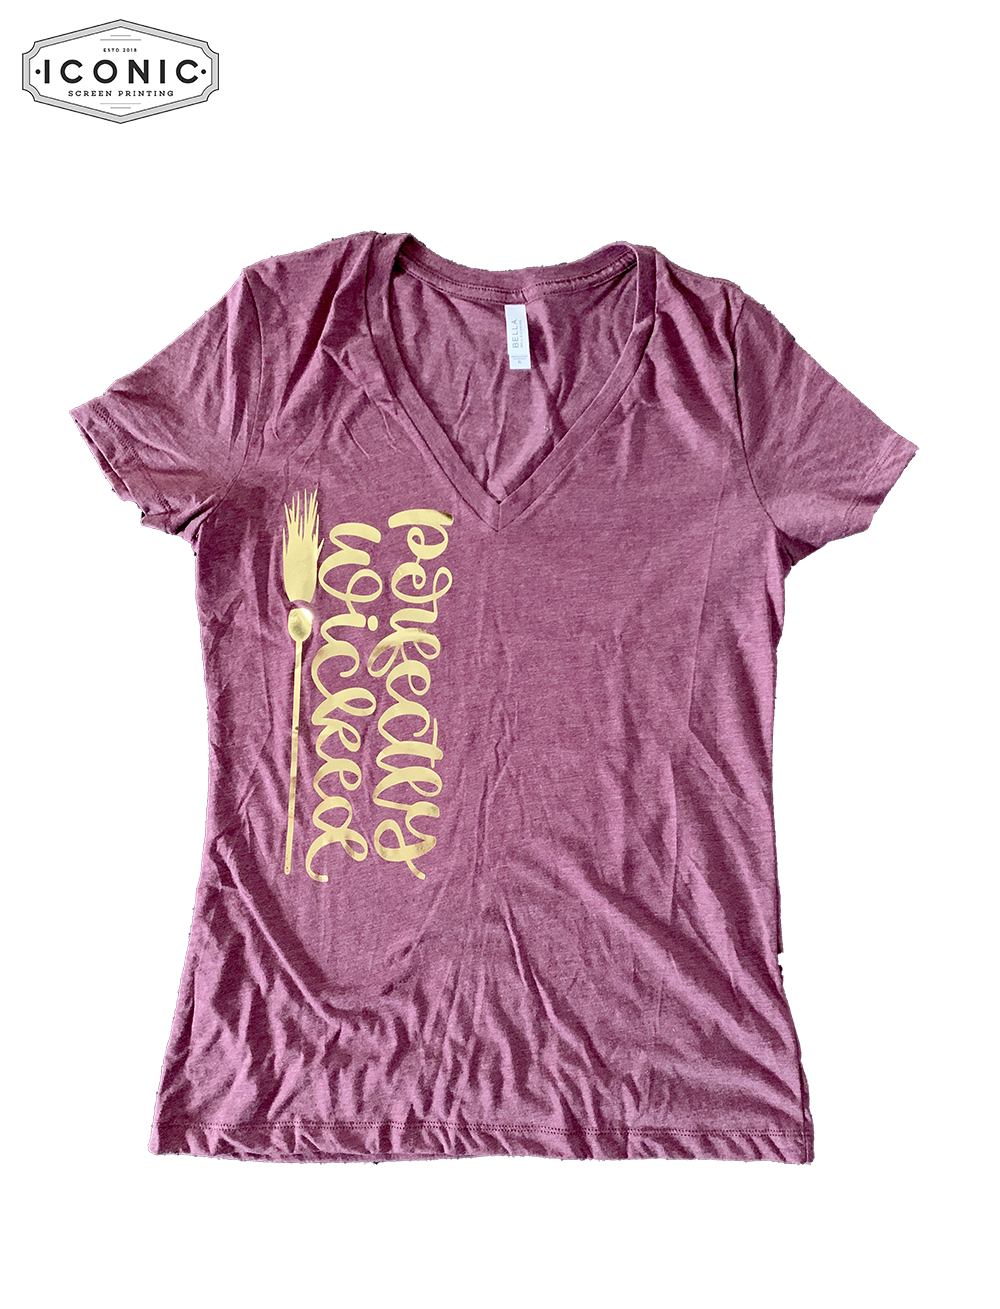 Perfectly Wicked - Women’s Triblend Deep V-Neck Tee